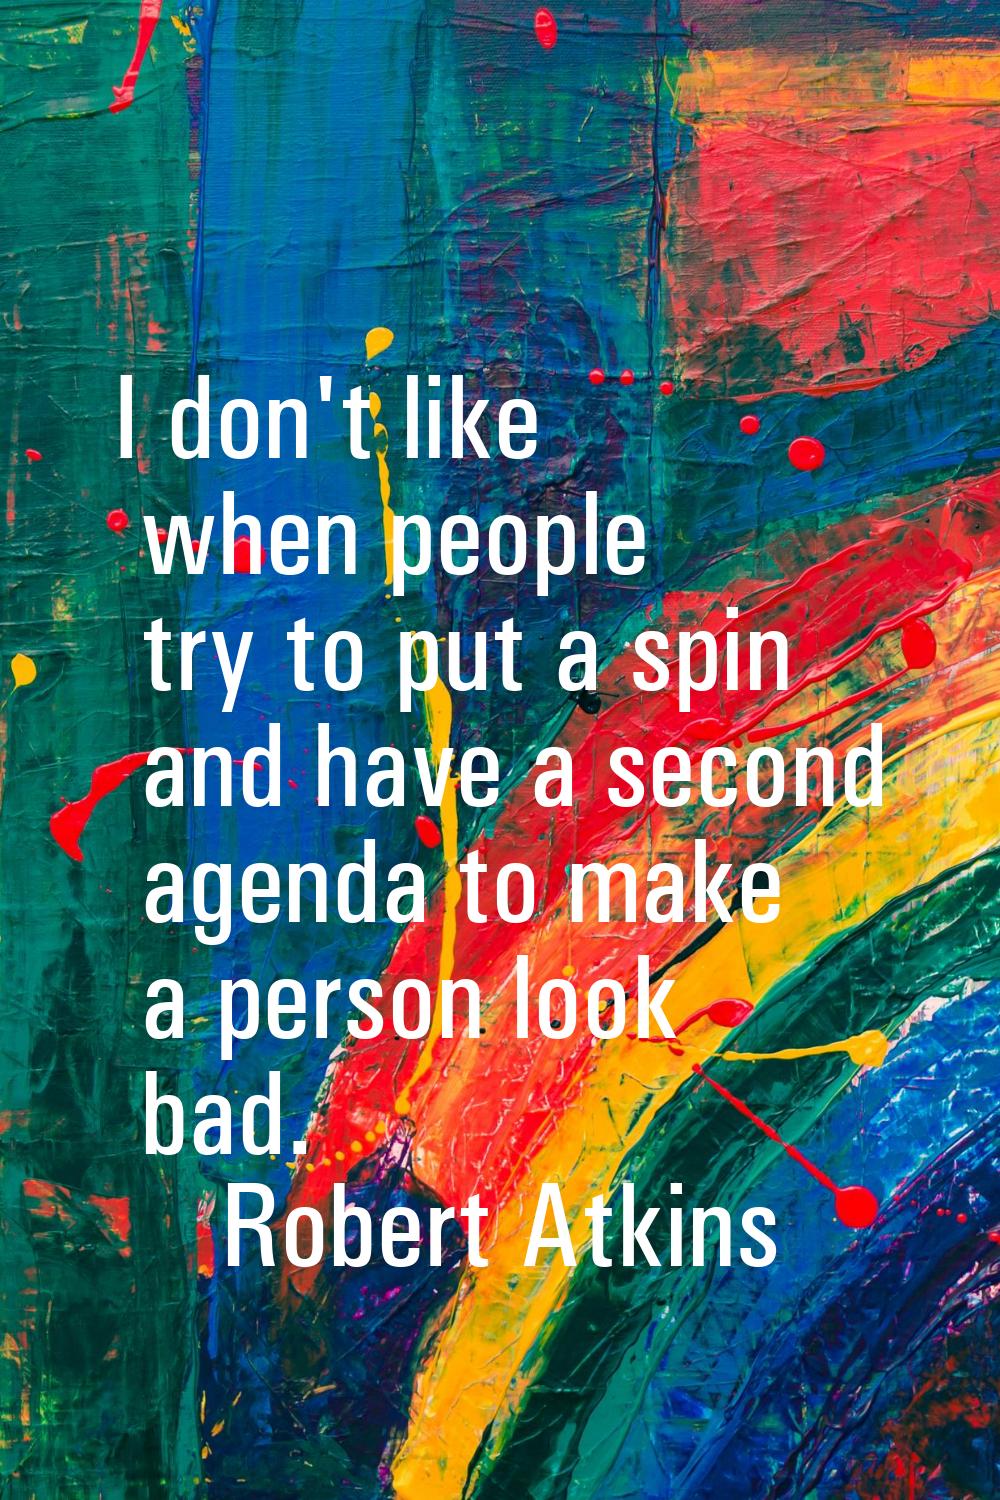 I don't like when people try to put a spin and have a second agenda to make a person look bad.